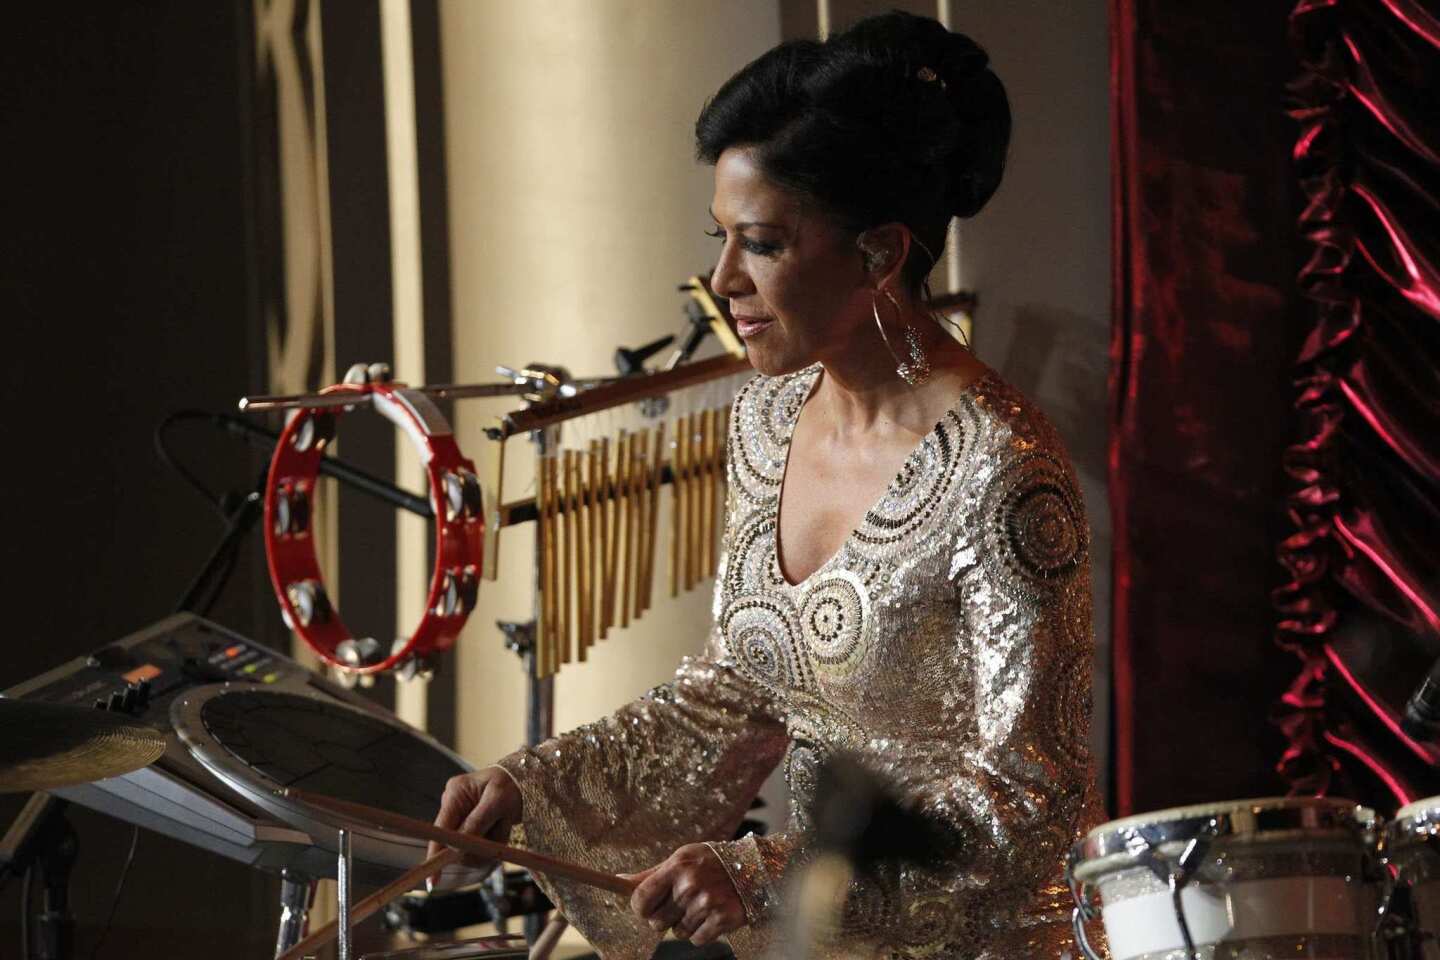 Percussionist Sheila E. performs at the 2012 Academy Awards in Hollywood.